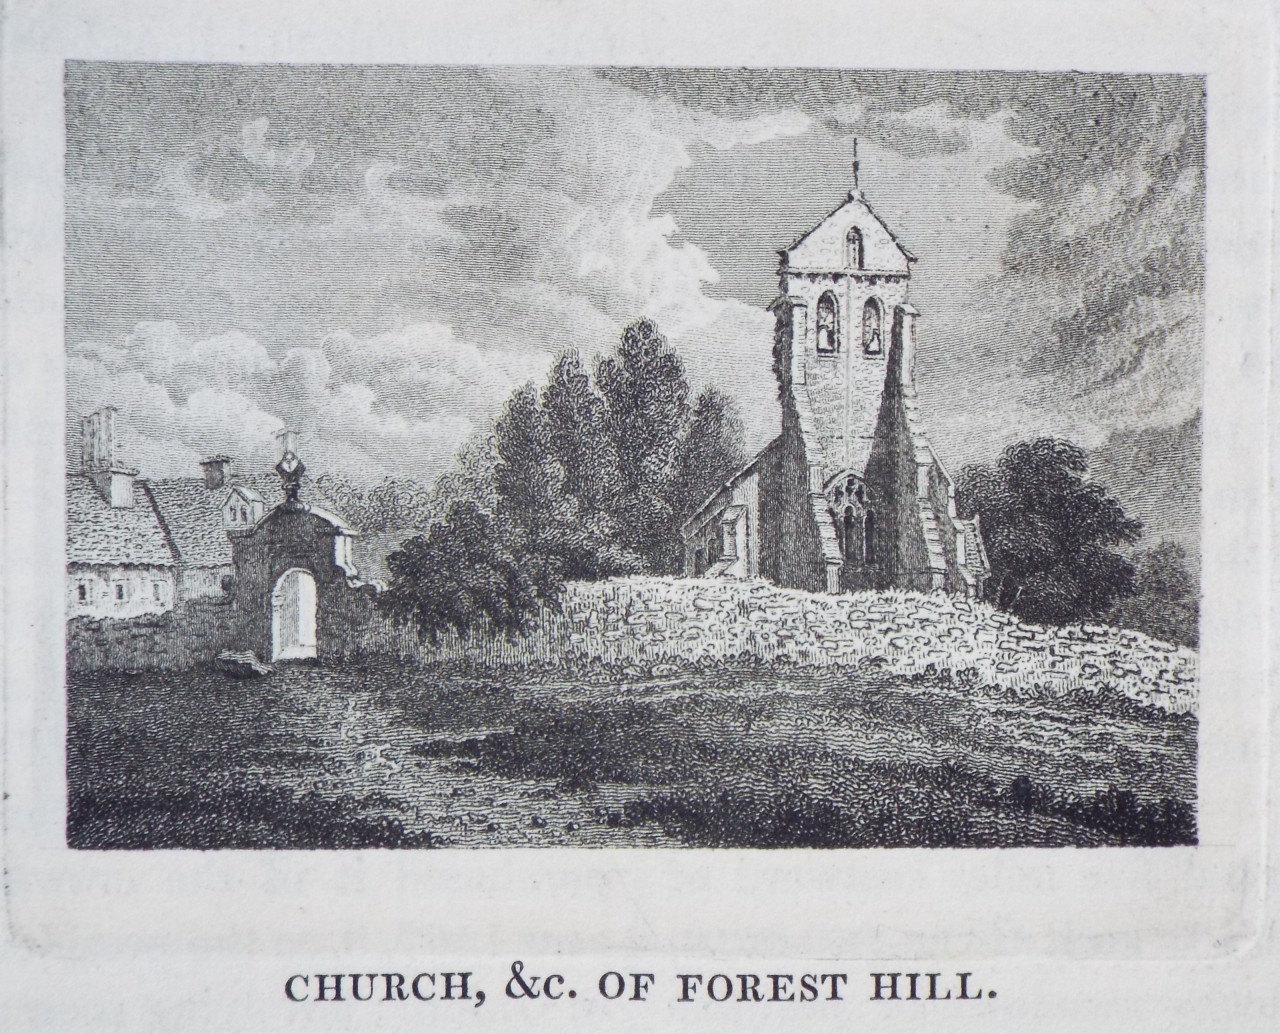 Print - Church, &c. of Forest Hill.